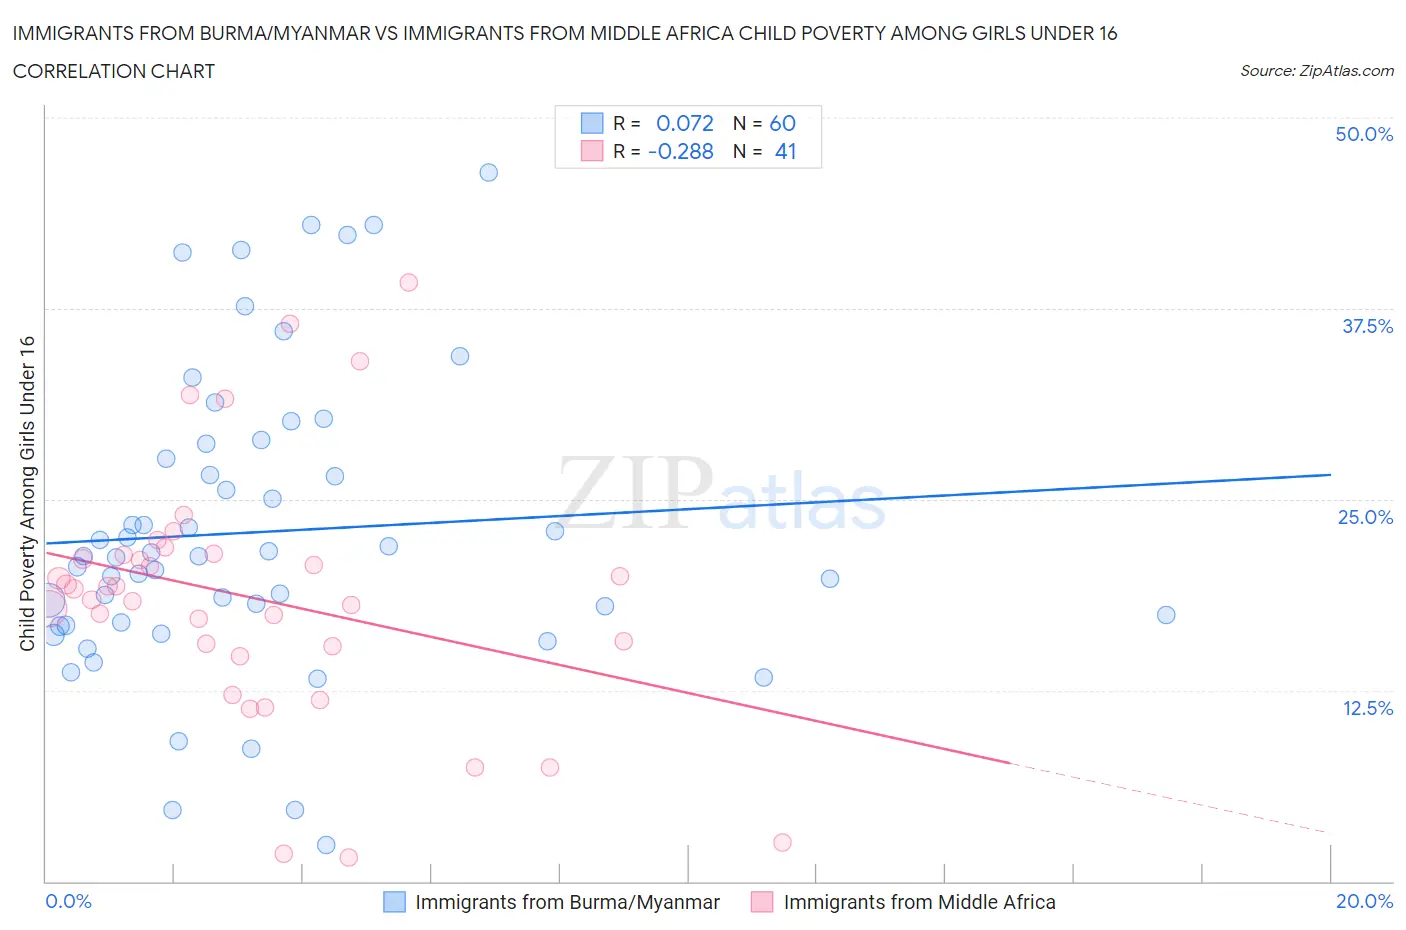 Immigrants from Burma/Myanmar vs Immigrants from Middle Africa Child Poverty Among Girls Under 16